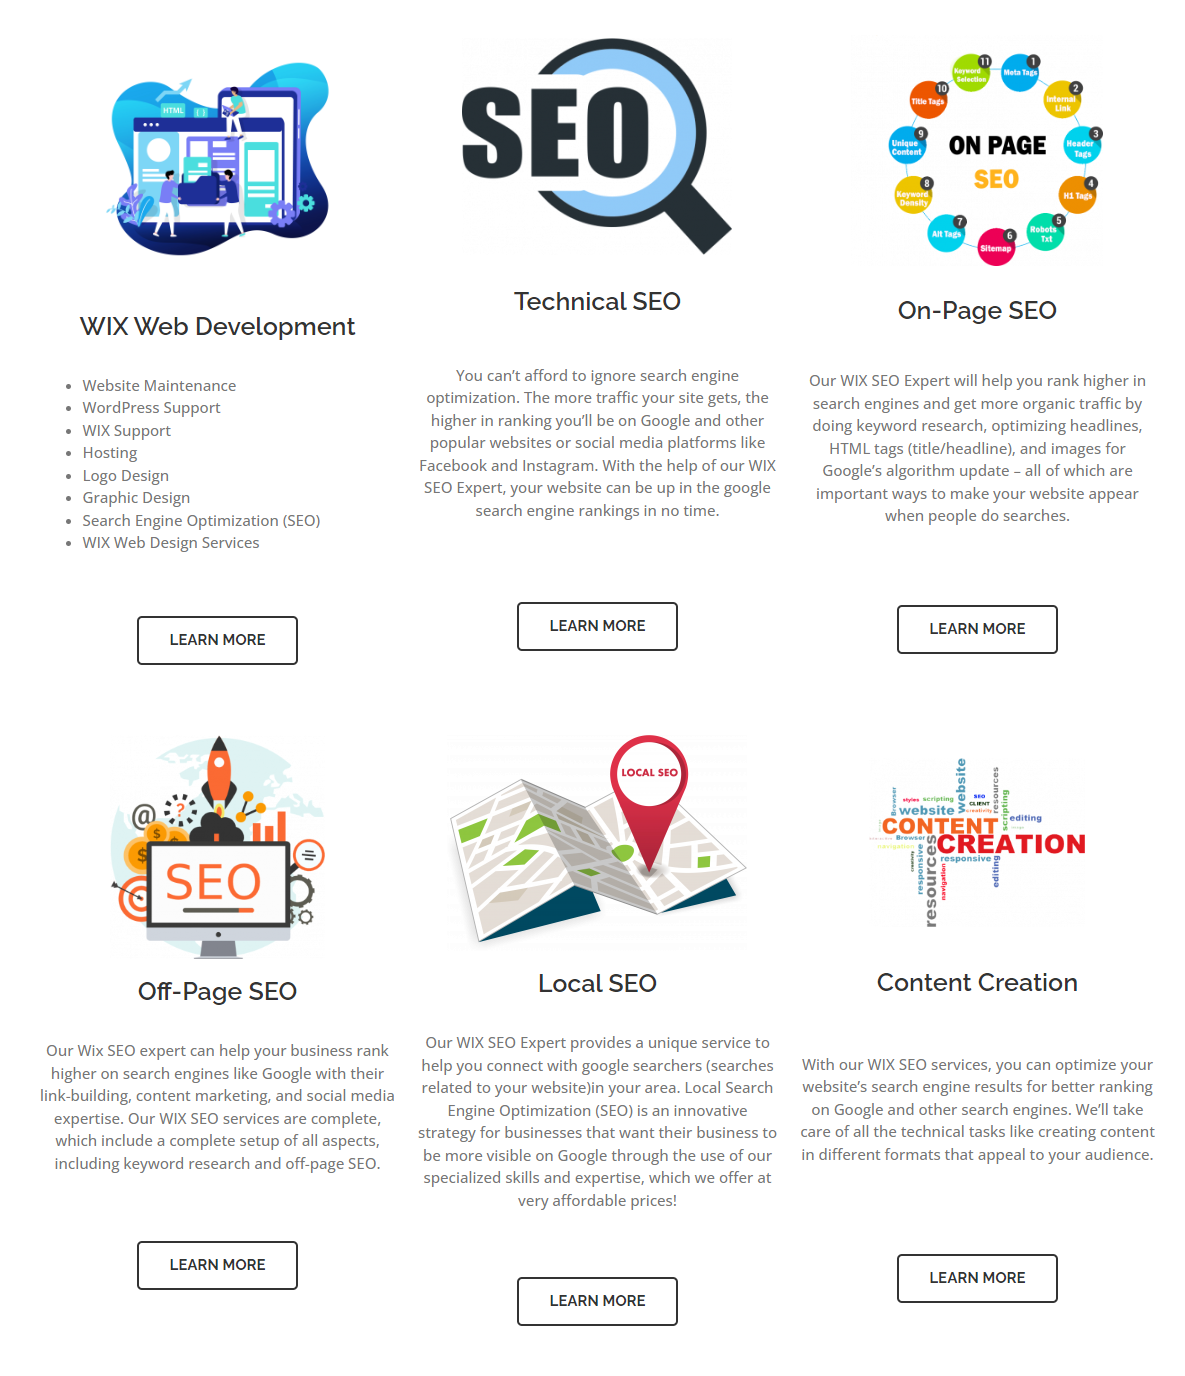 Why Do You Need a Wix SEO Service?